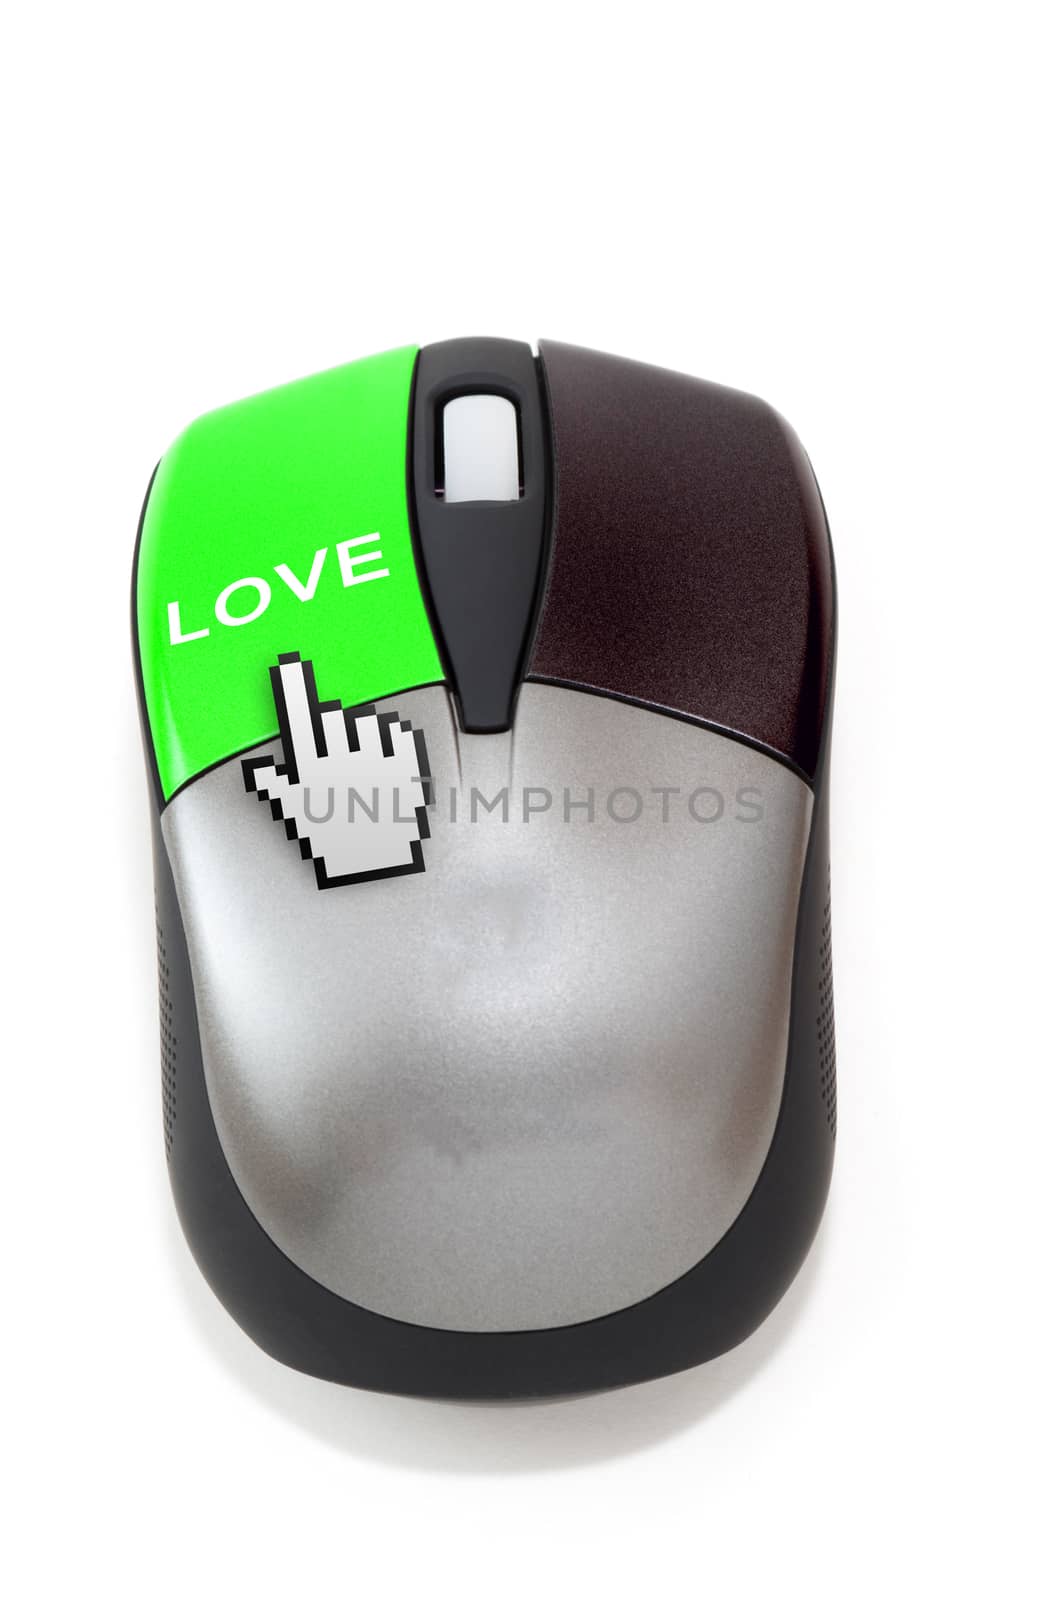 Hand cursor clicking on love button by daoleduc